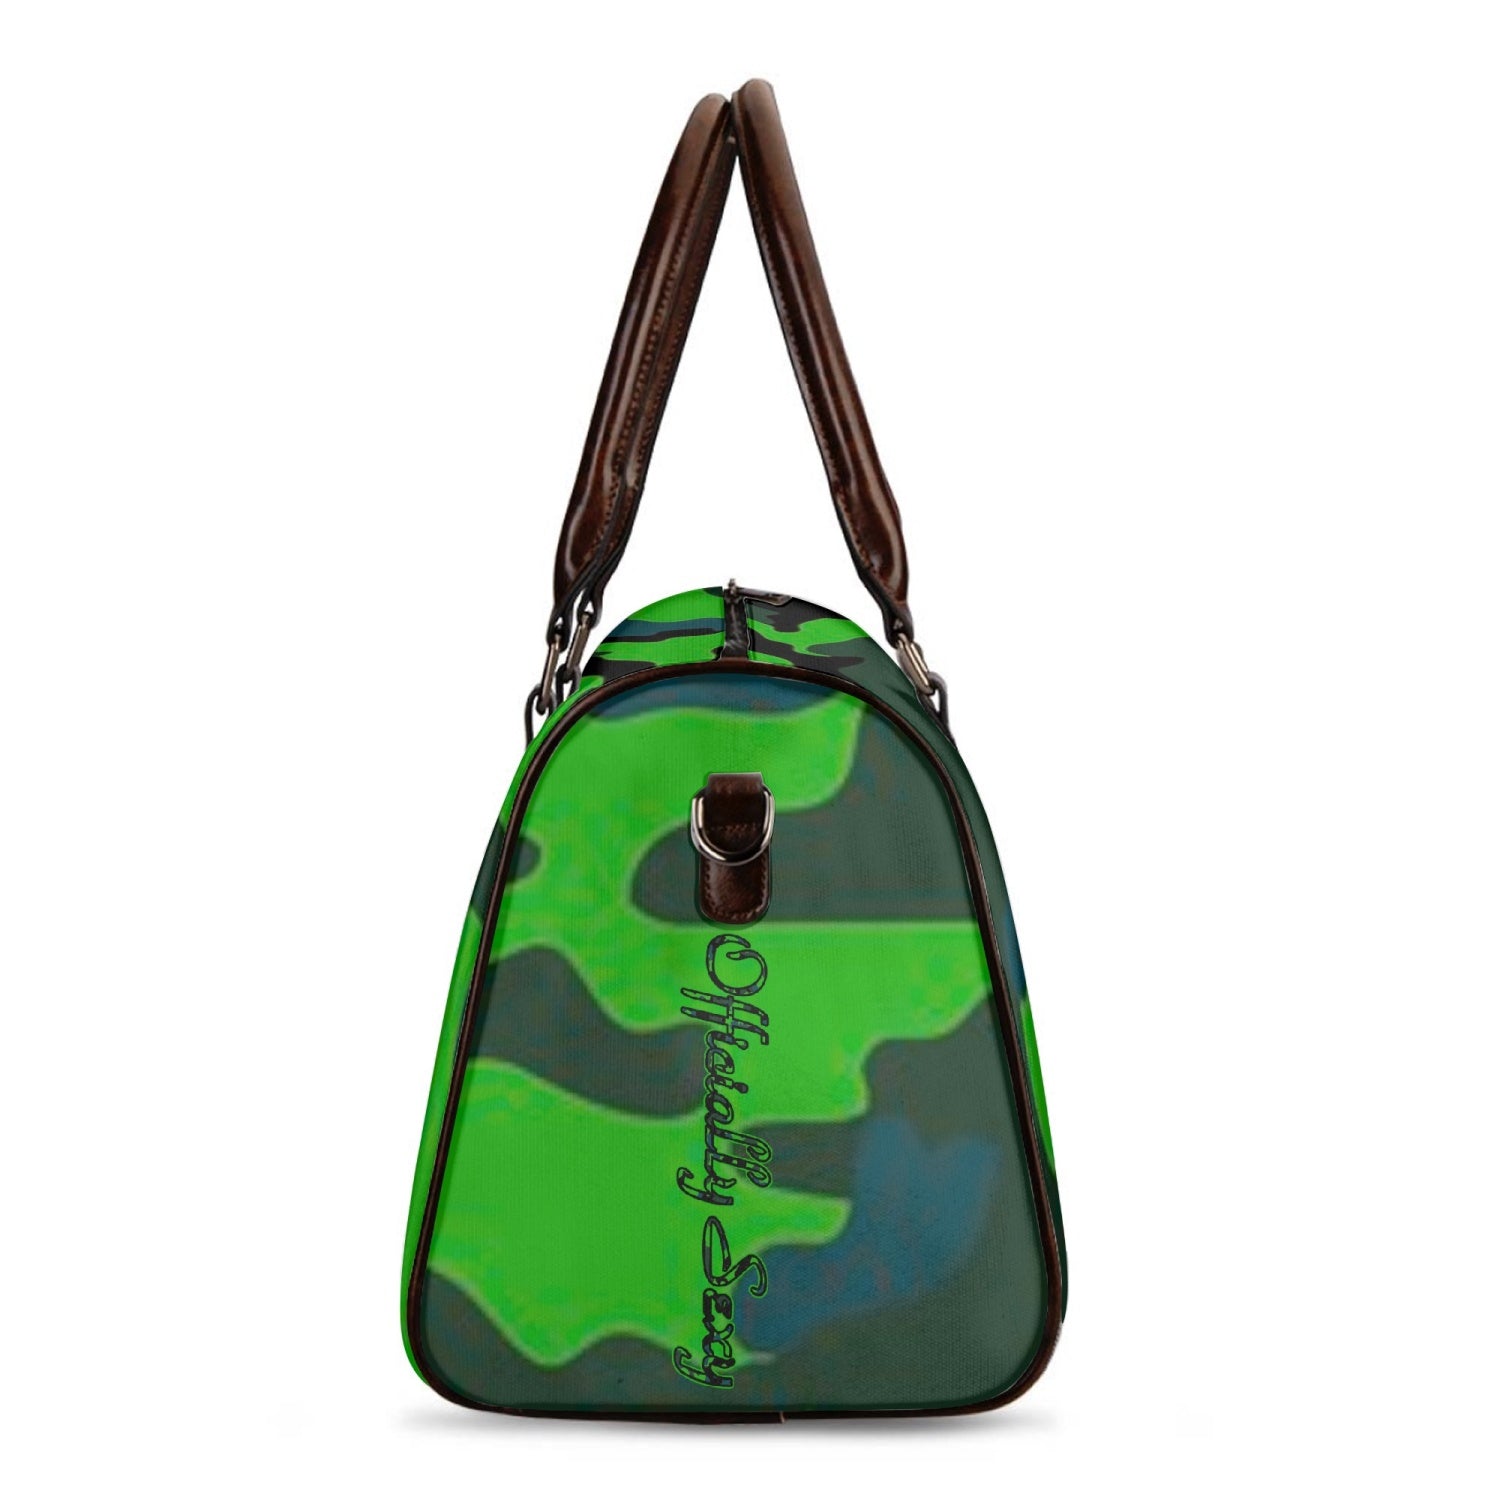 Officially Sexy Green Army Camouflage Collection Duffle Bag Regular price